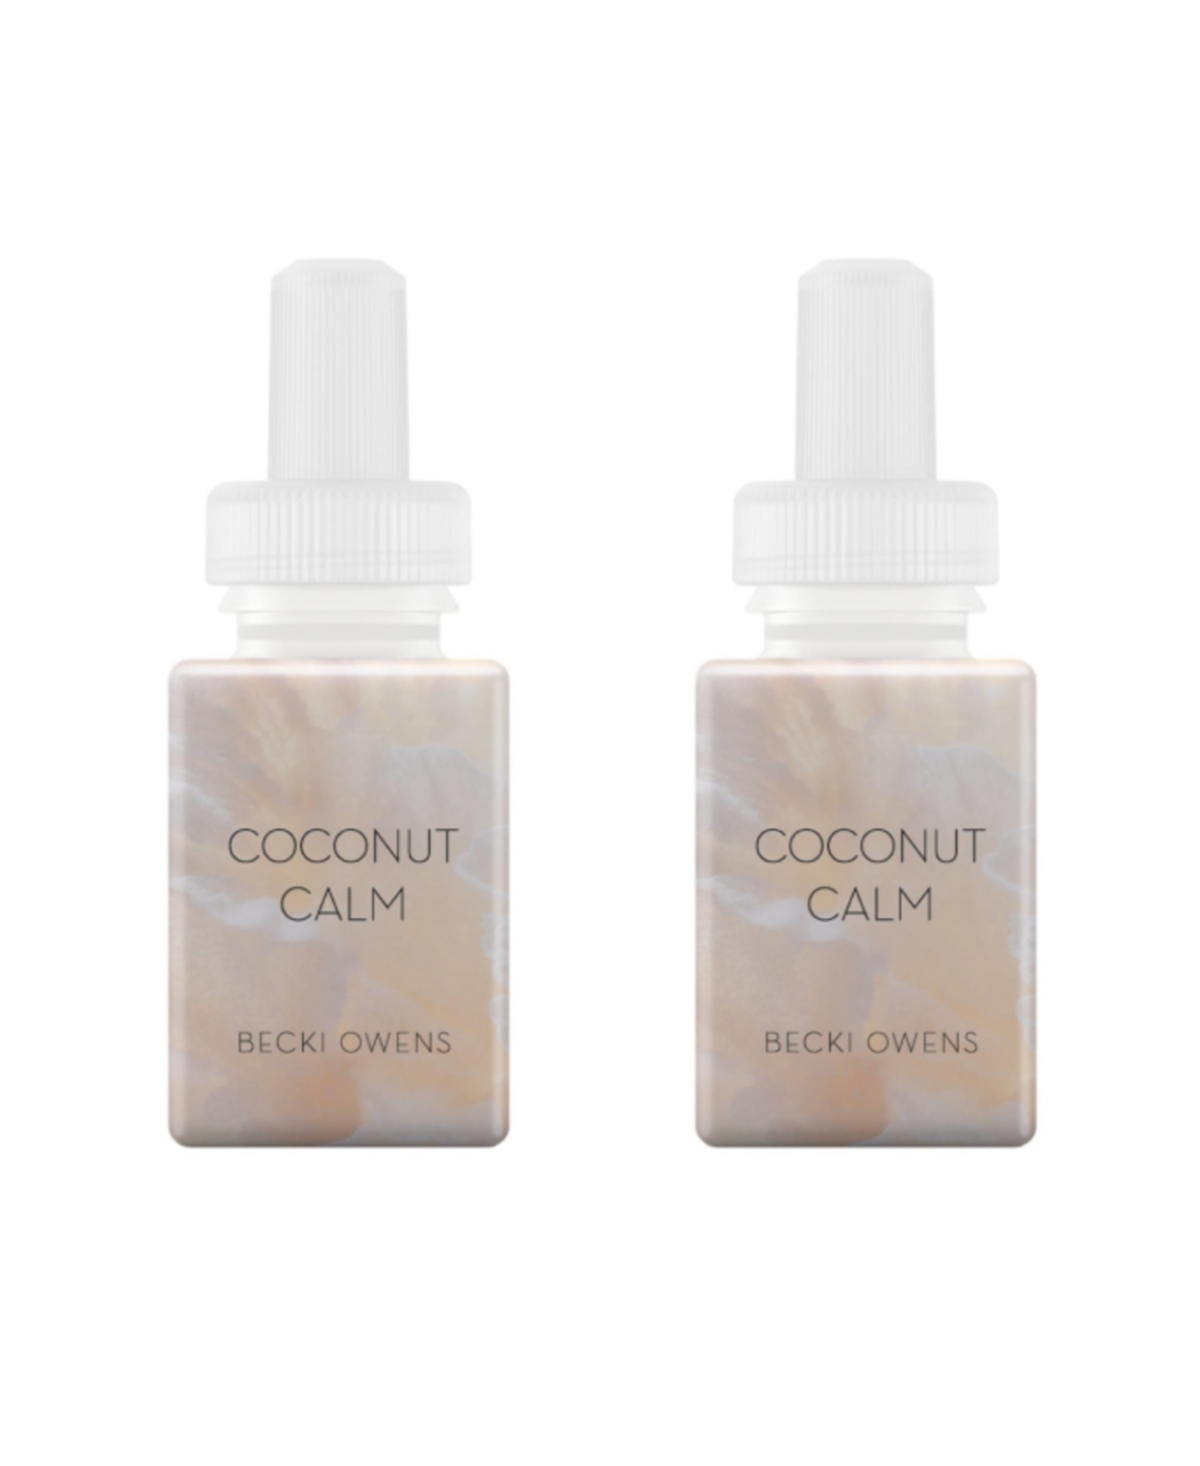 Becki Owens - Coconut Calm - Home Scent Refill - Smart Home Air Diffuser Fragrance - Up to 120-Hours of Premium Fragrance per Refill - Household